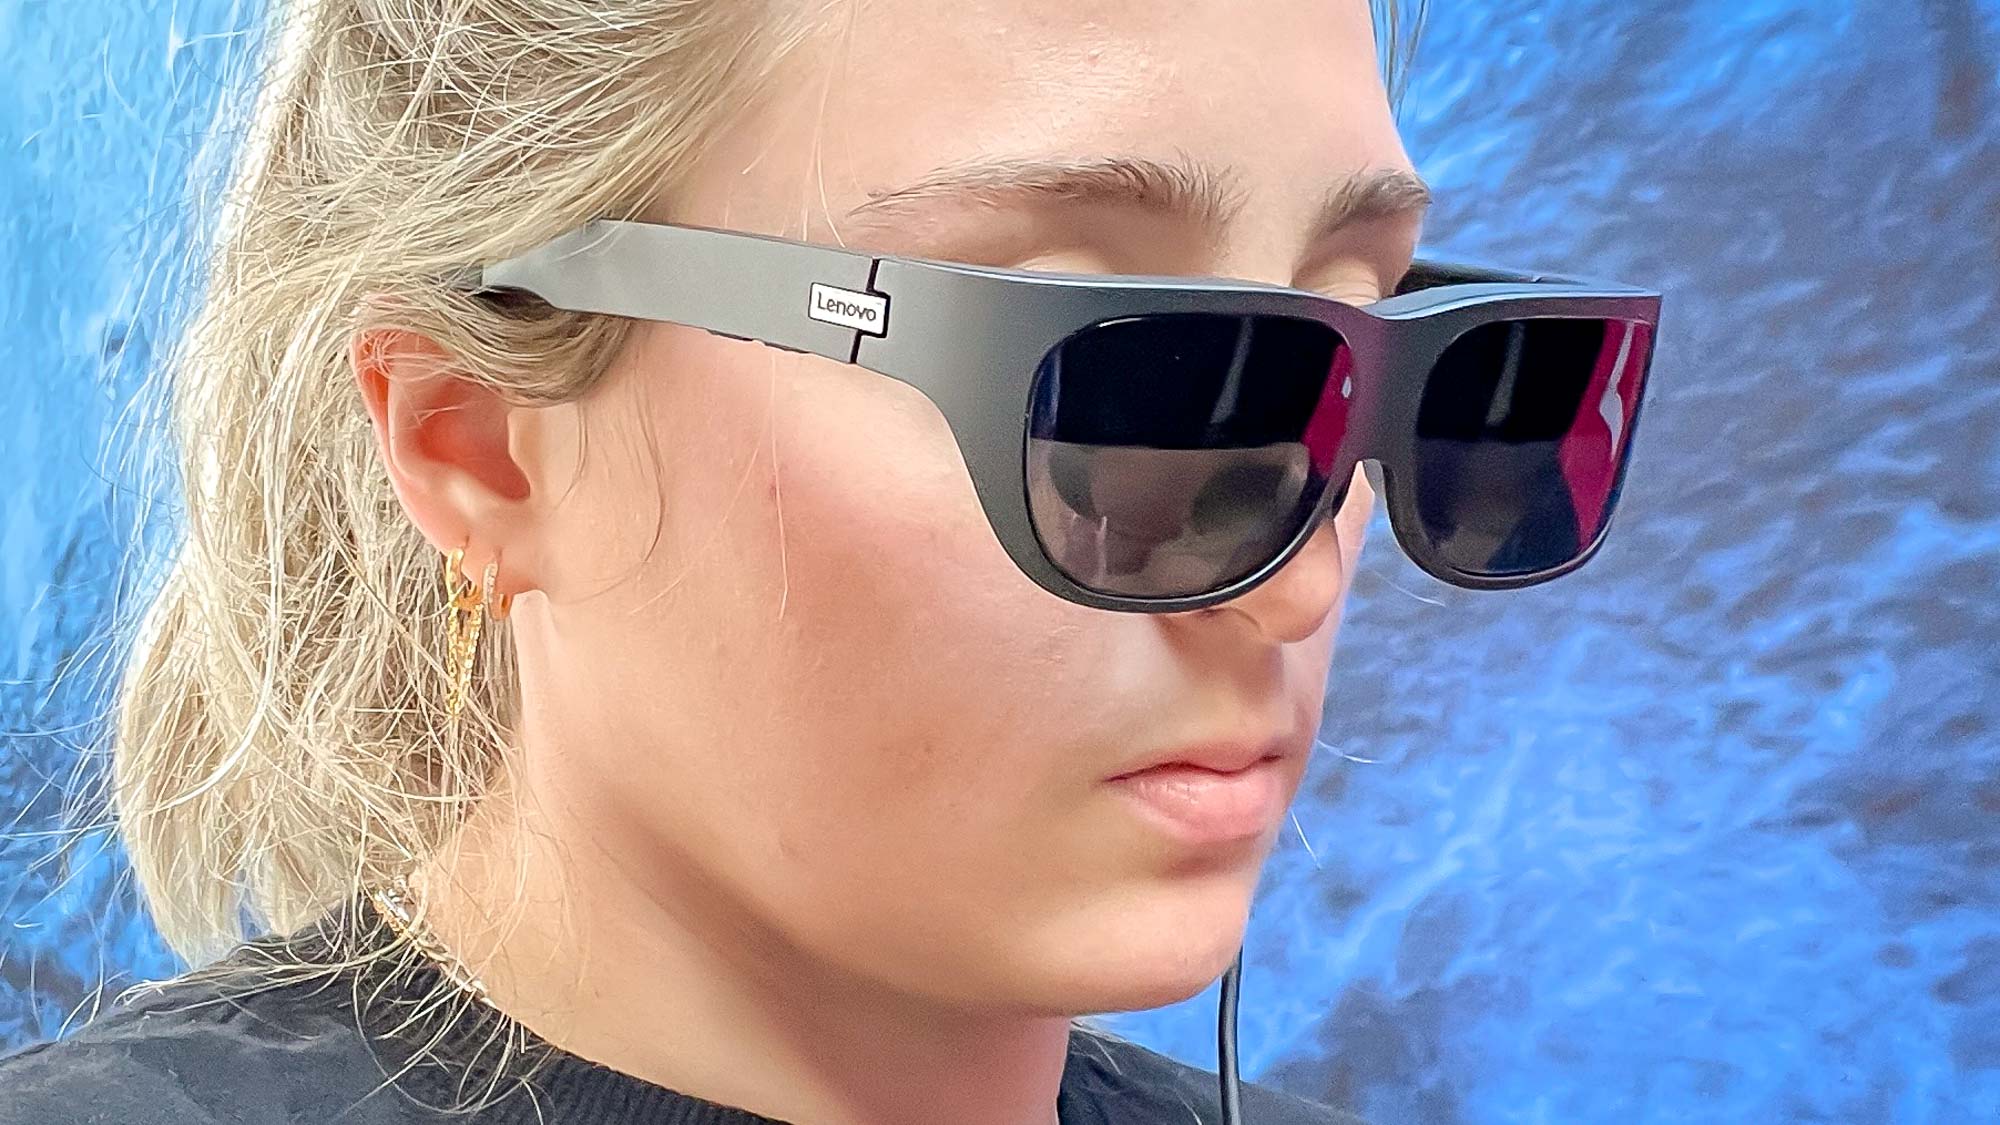 I just tried Lenovo's new smart display glasses — is this the future? |  Tom's Guide